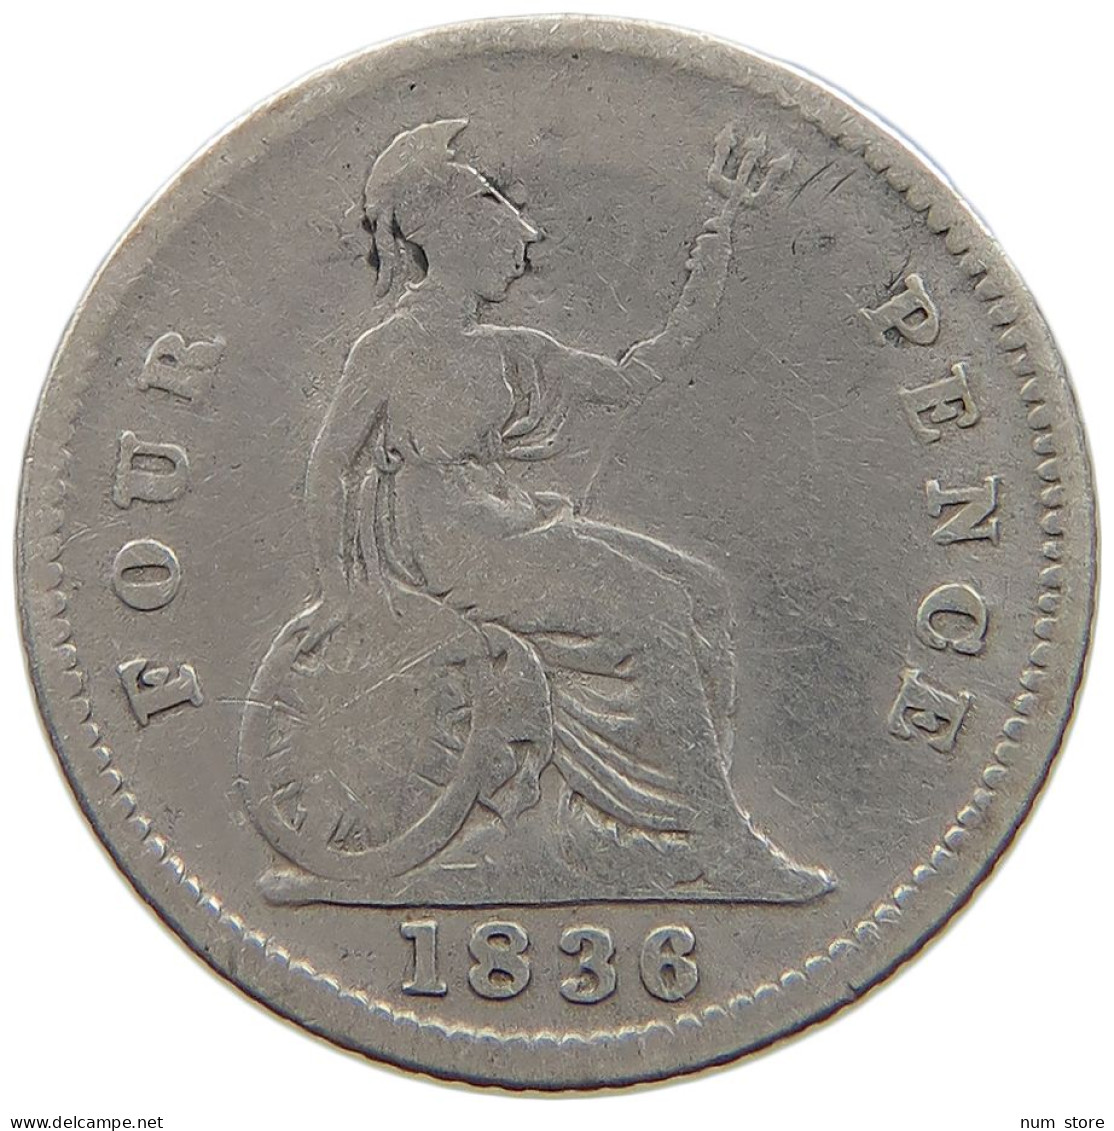 GREAT BRITAIN FOURPENCE 1836 WILLIAM IV. (1830-1837) #MA 021192 - G. 4 Pence/ Groat